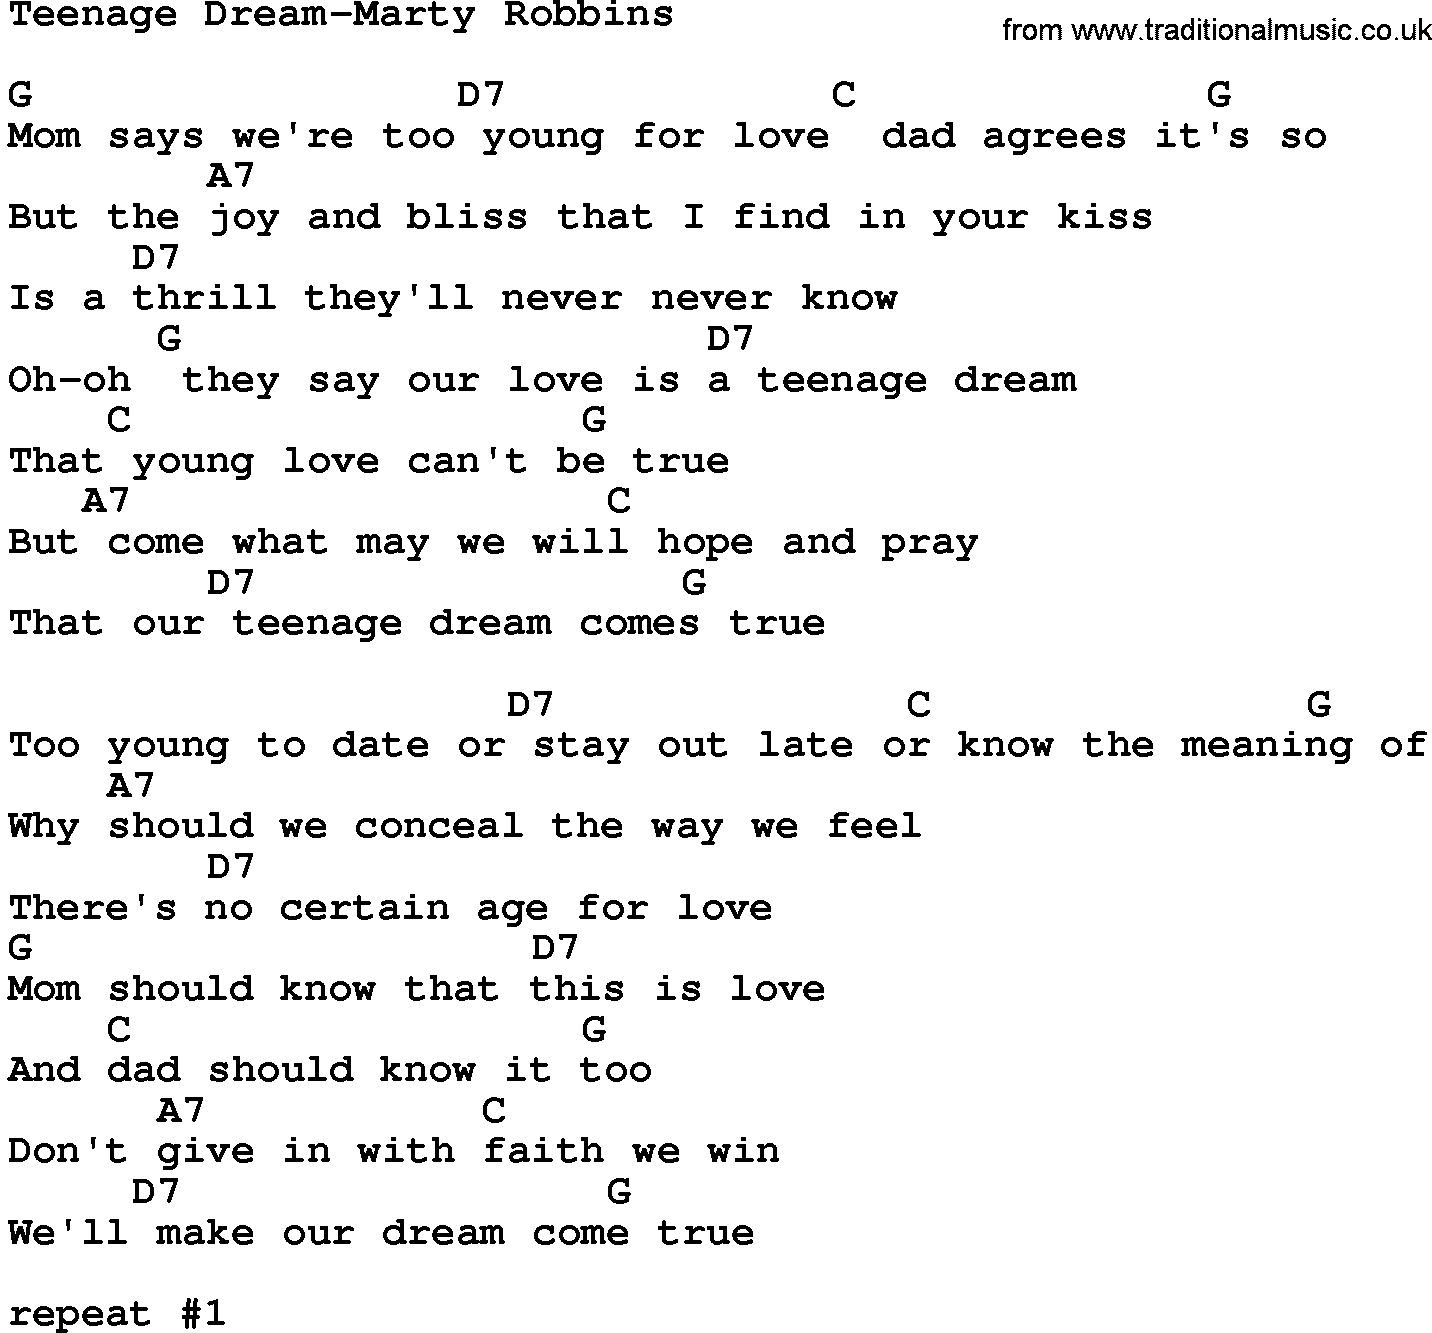 Country music song: Teenage Dream-Marty Robbins lyrics and chords